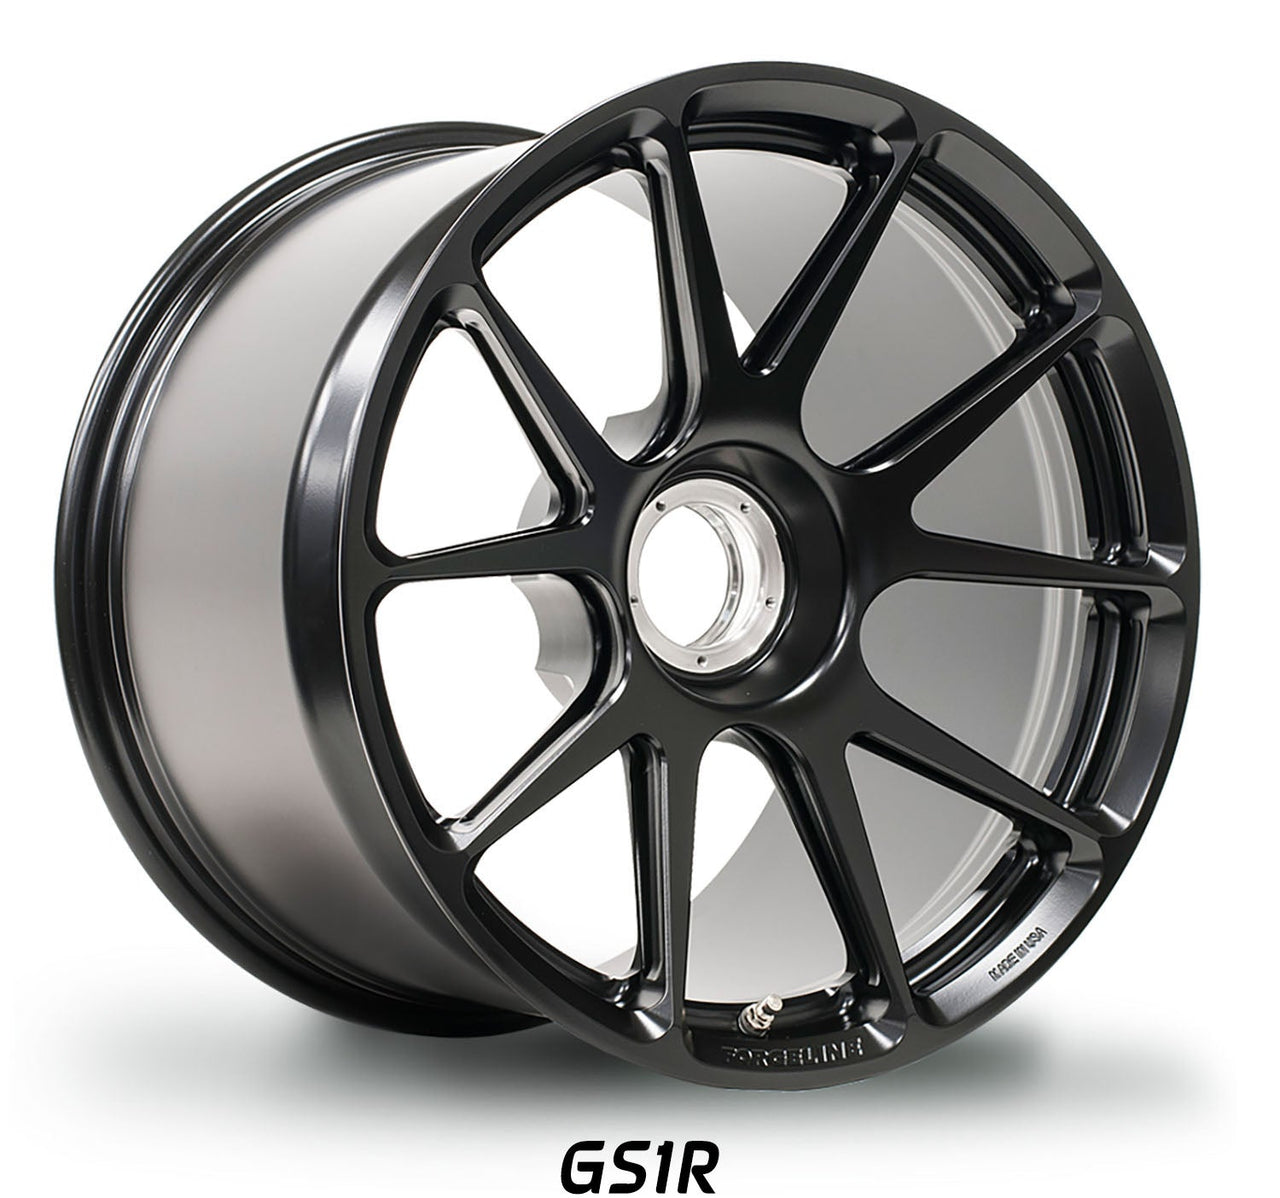 Forgeline GS1R 2014-2016 Porsche 991 GT3 best forged monoblock wheels for racing and track days